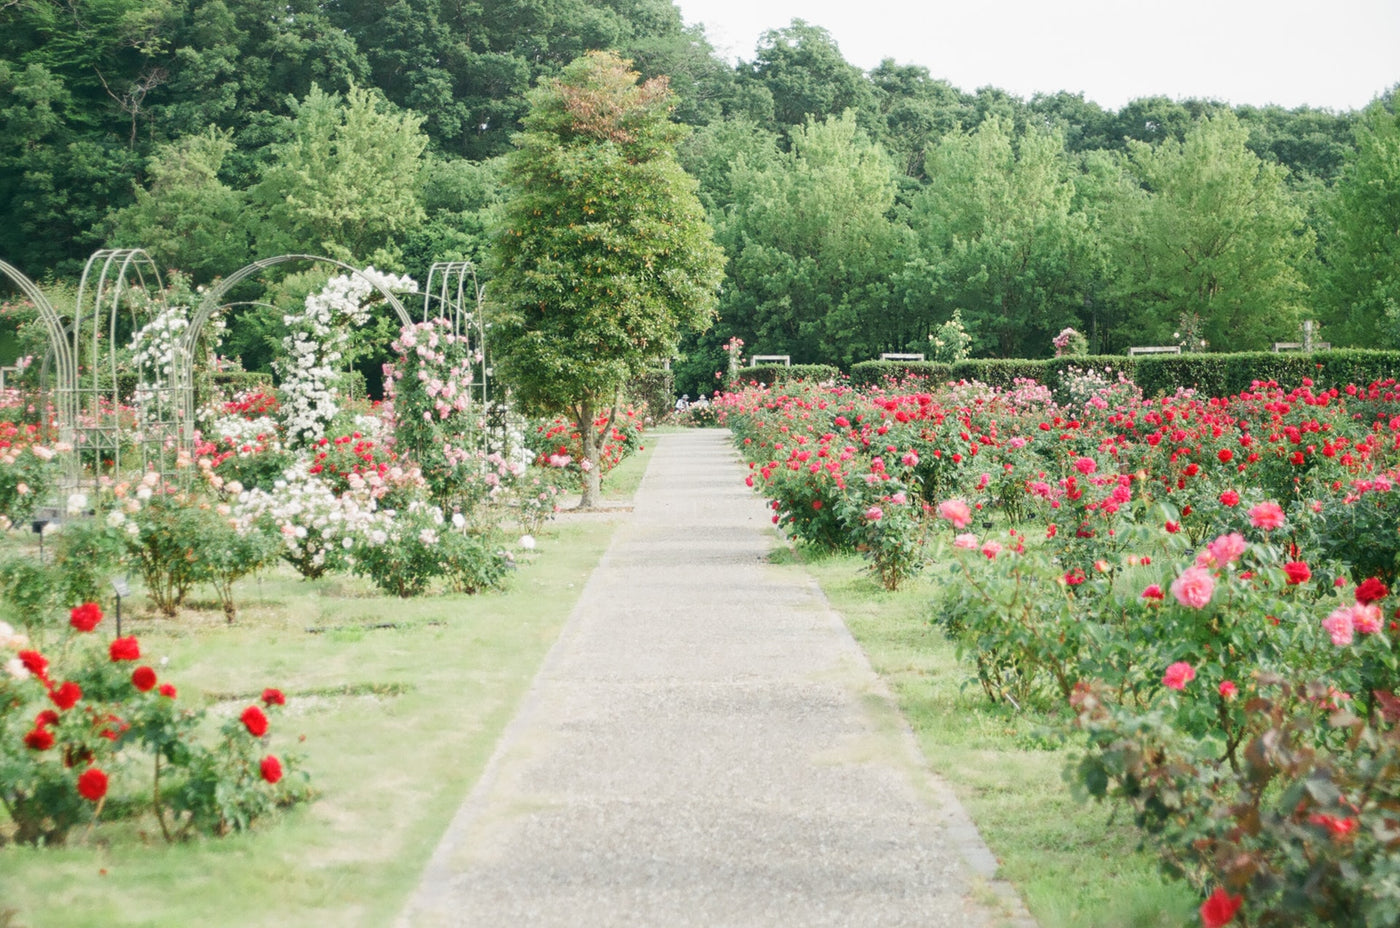 5 gardens to visit in the UK